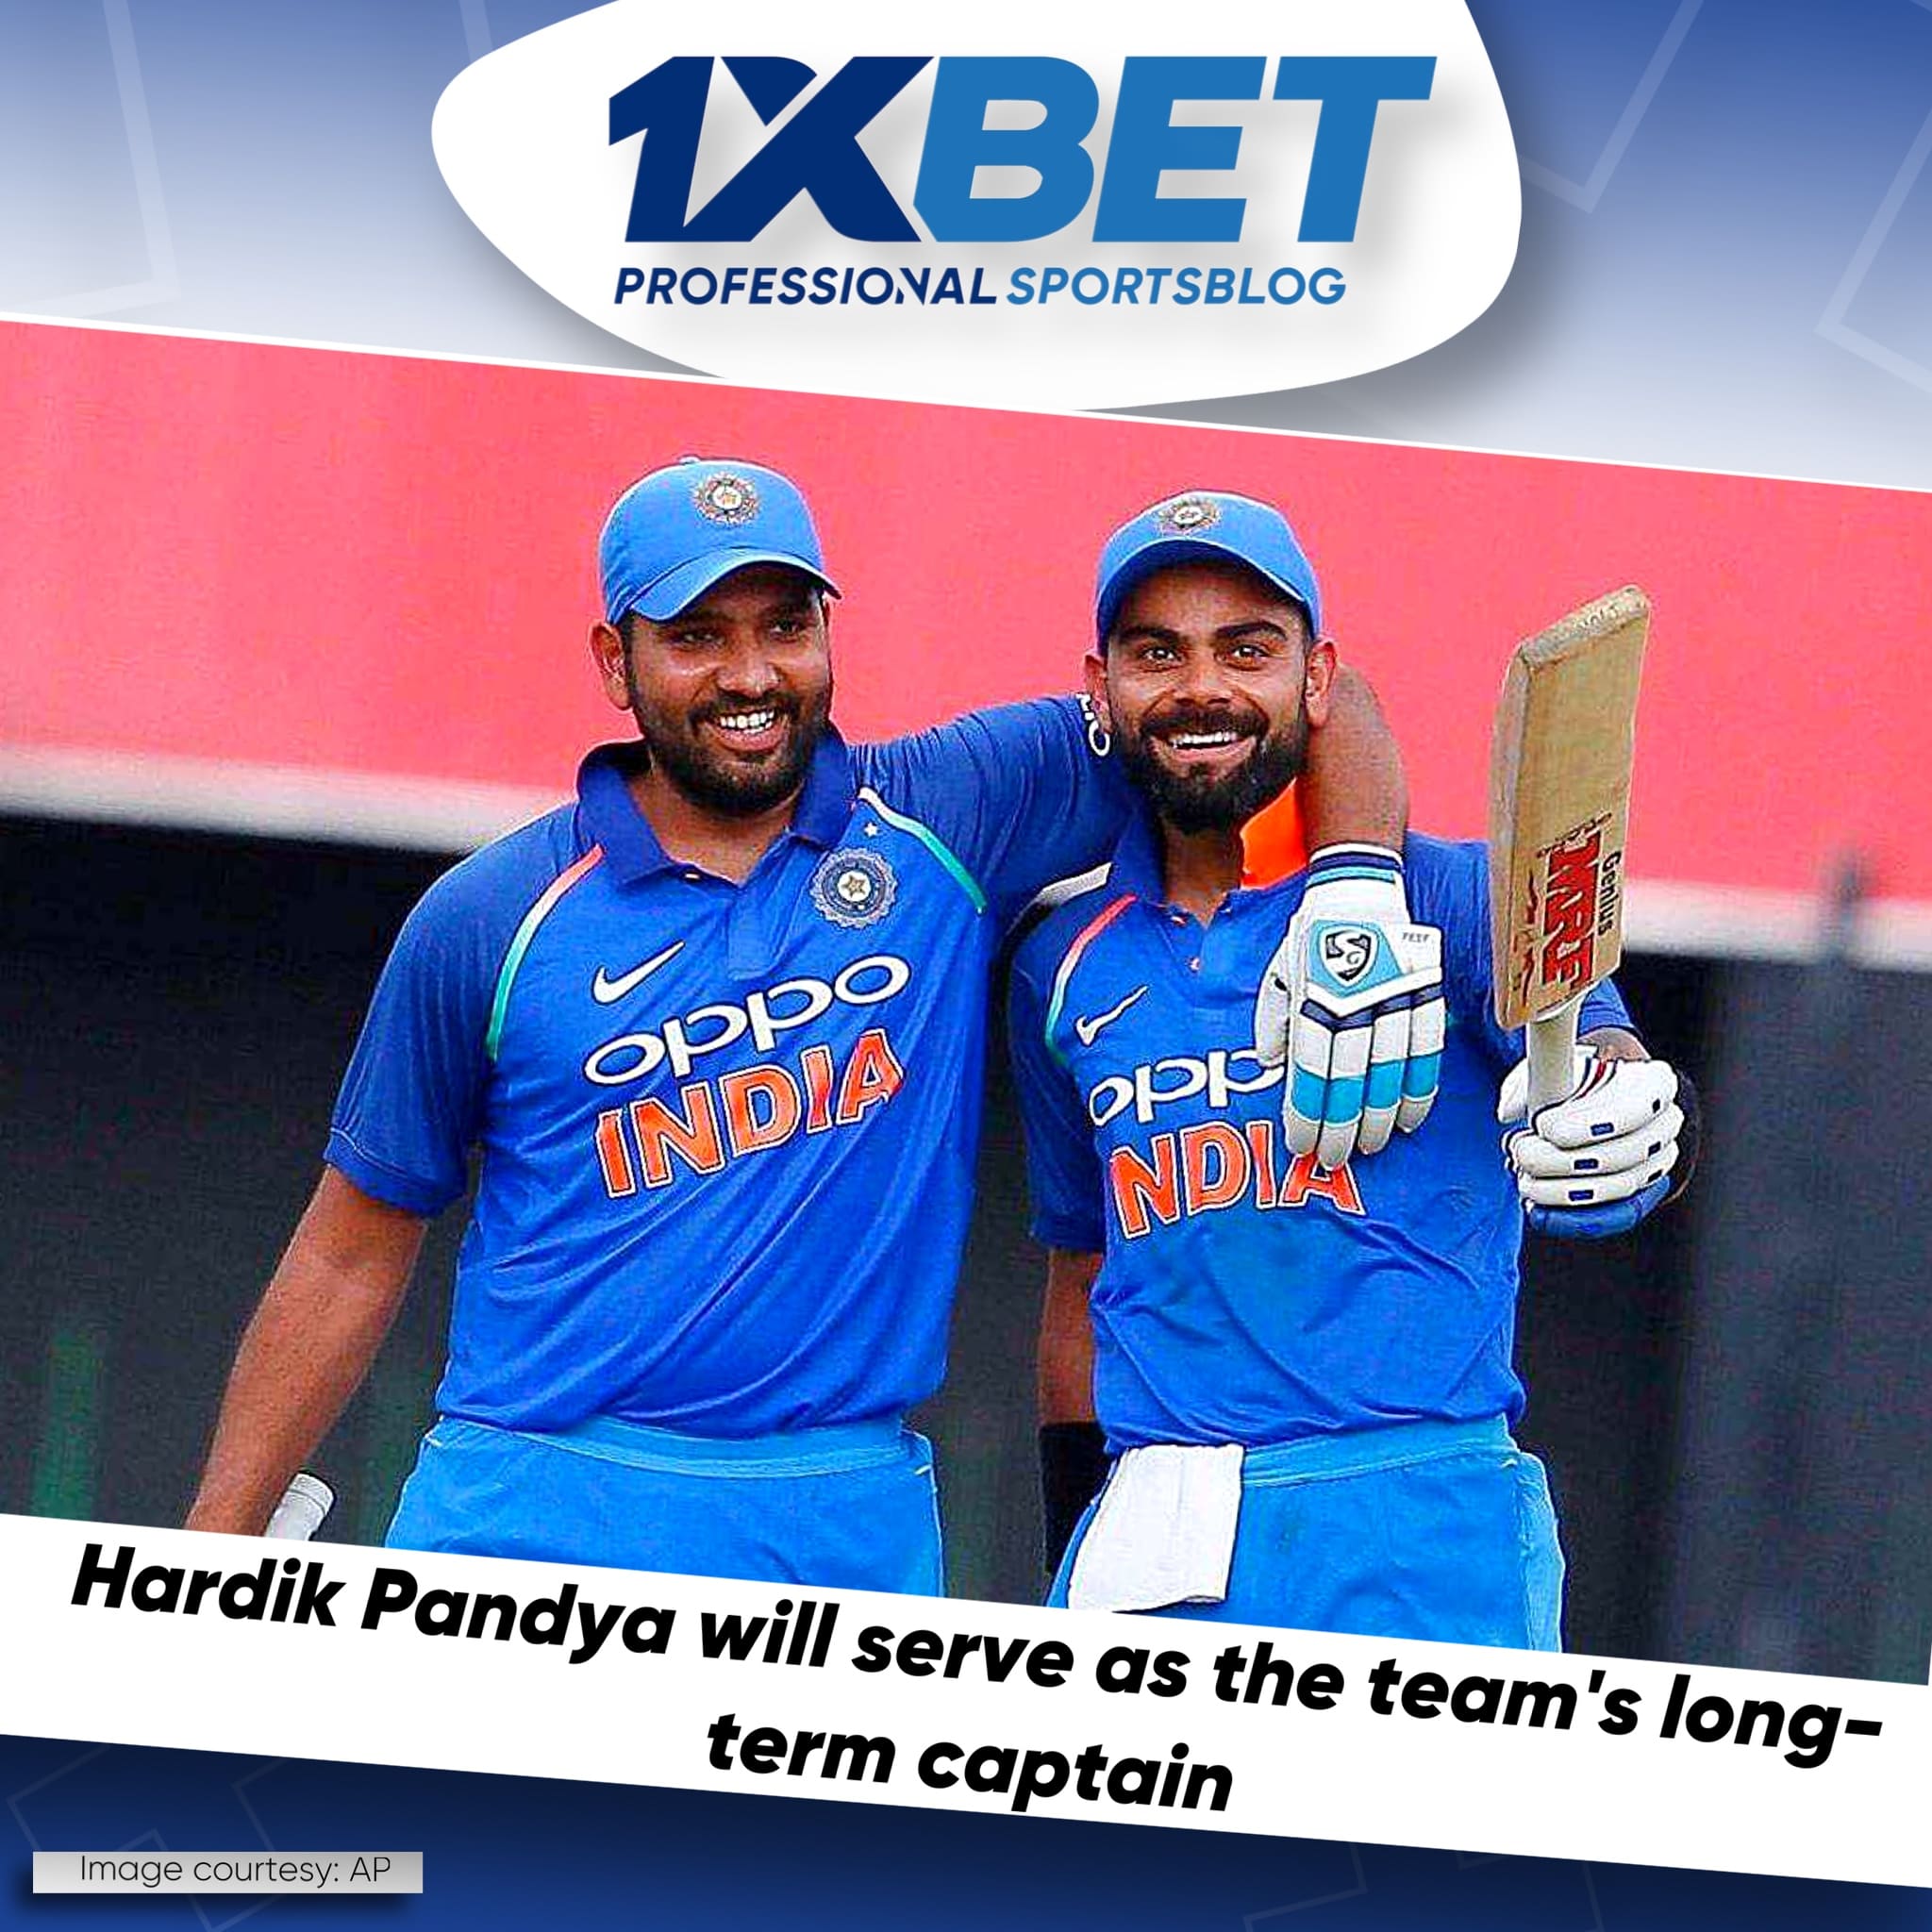 Hardik Pandya will serve as the team's long-term captain, with Rohit Sharma and Virat Kohli unlikely to be chosen for T20 Internationals